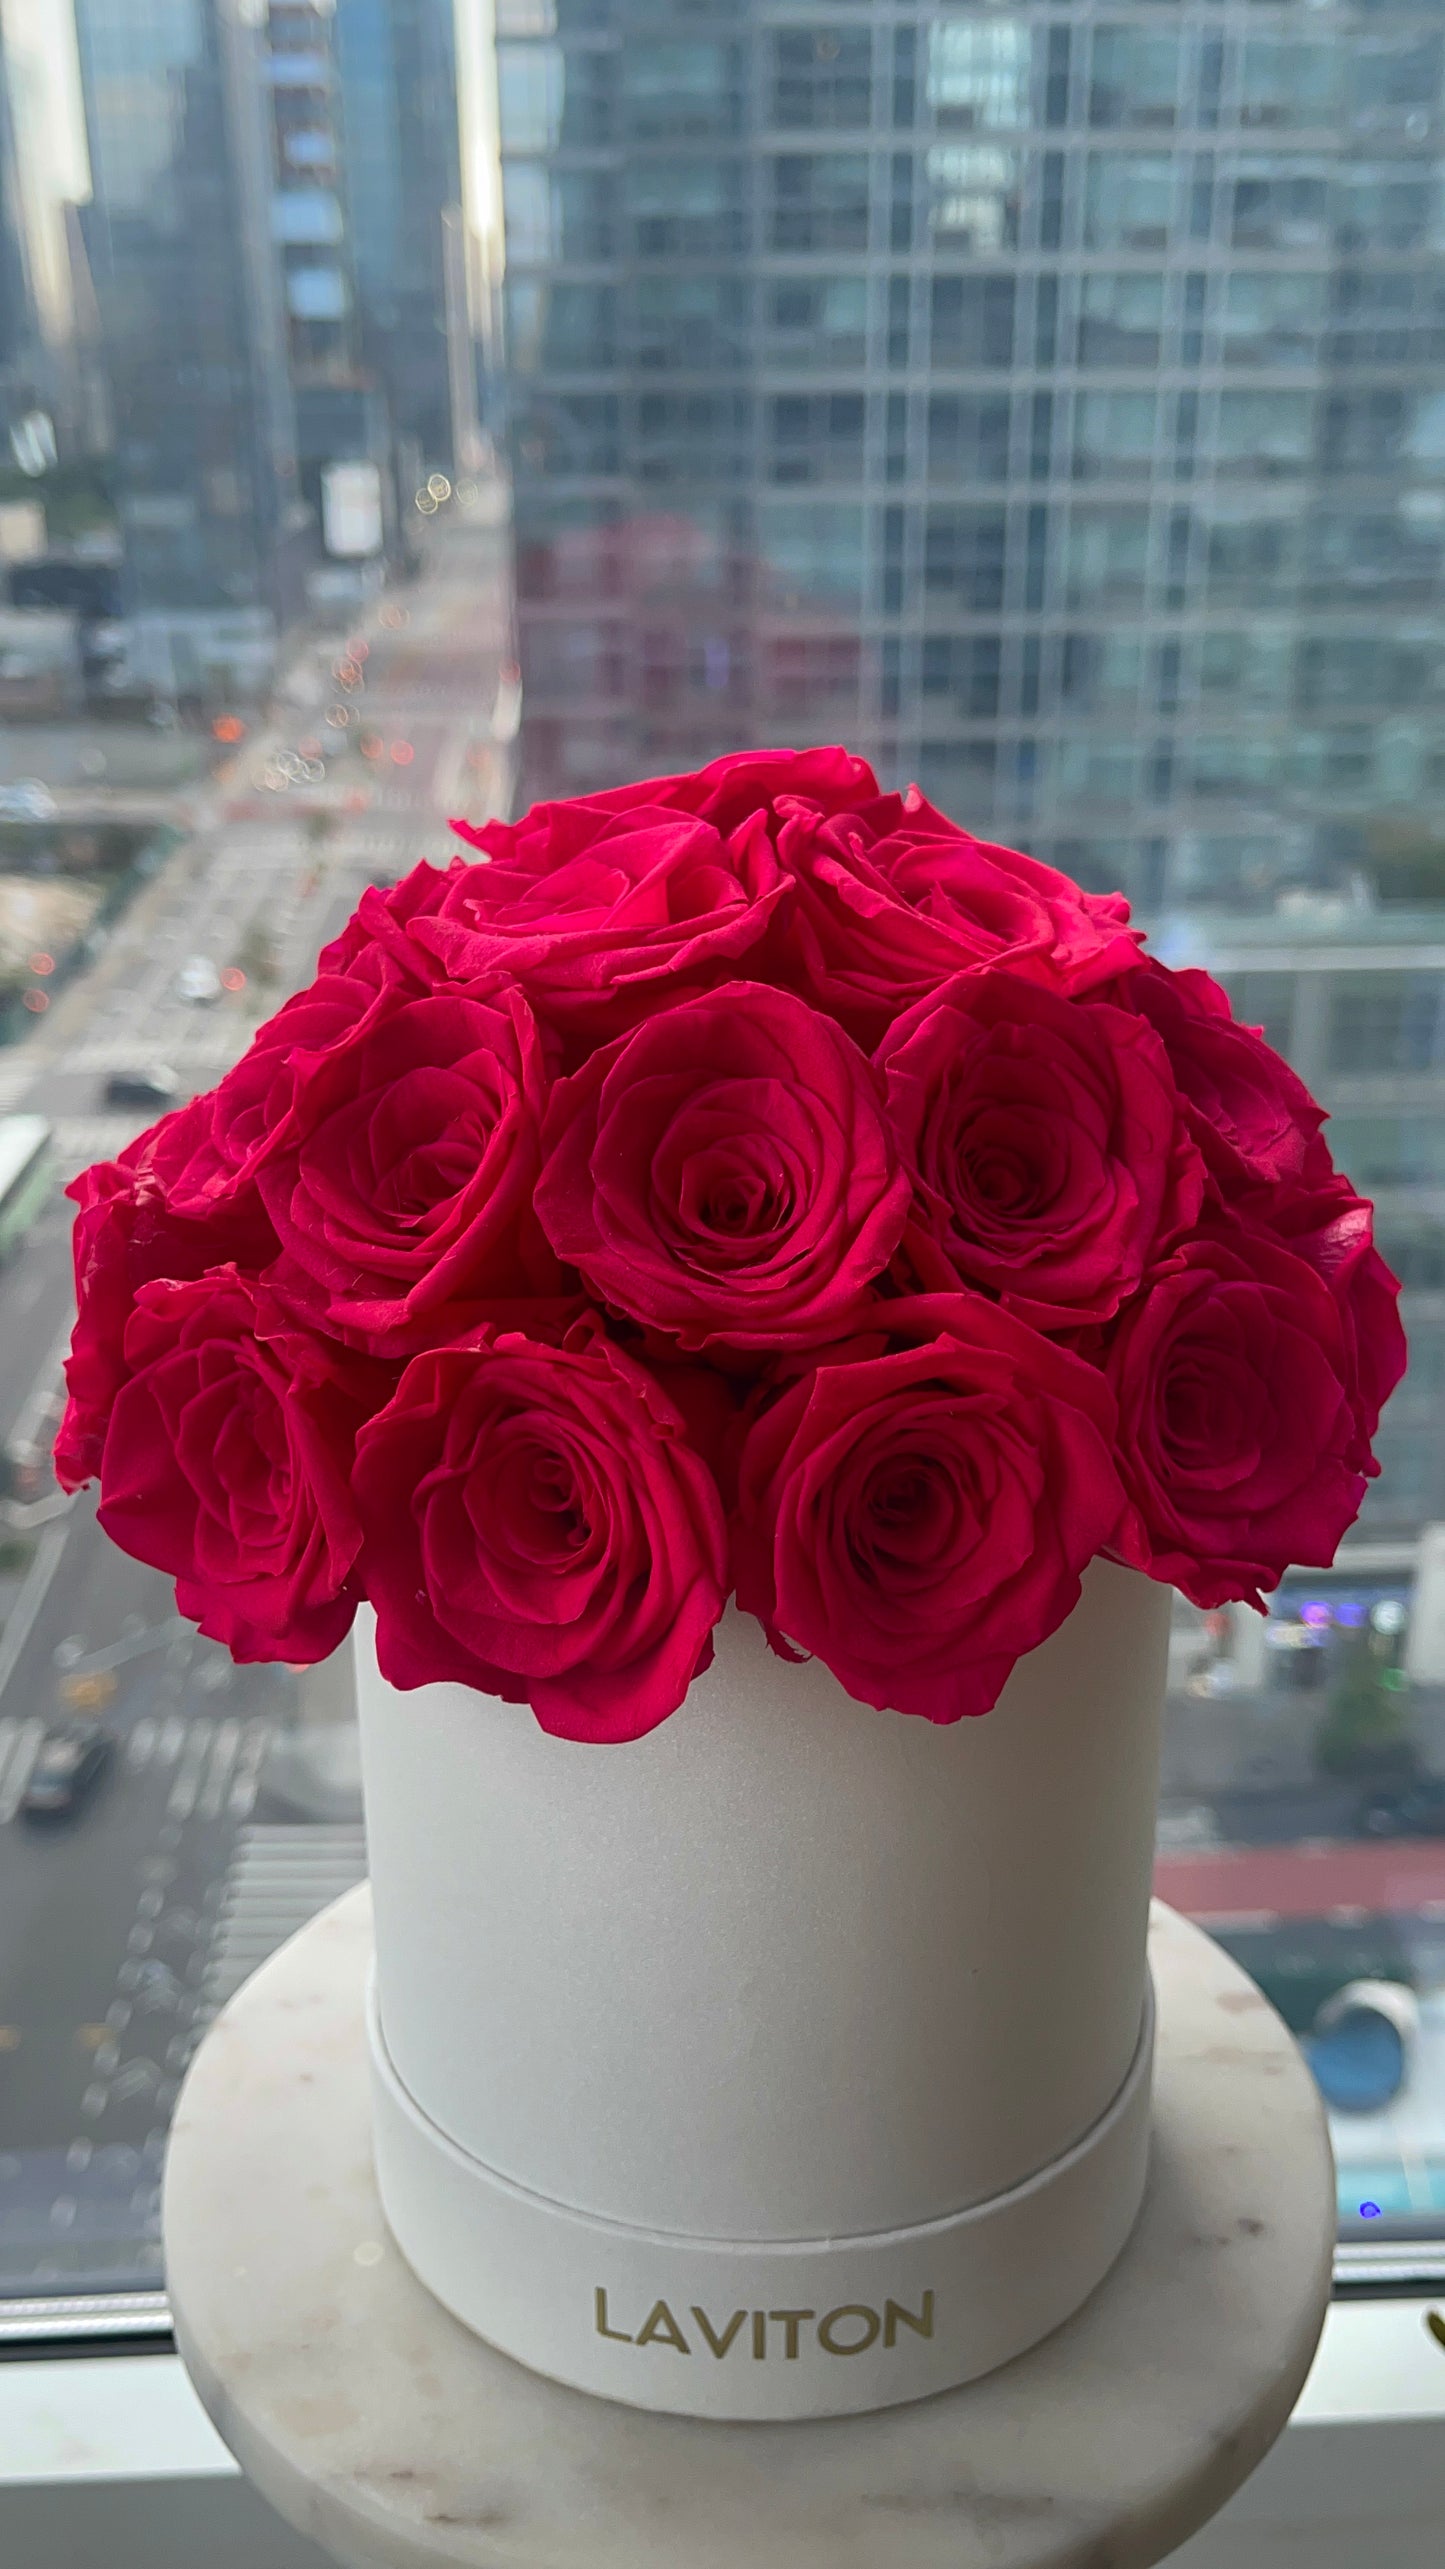 HOT PINK DOME ETERNITY ROSES